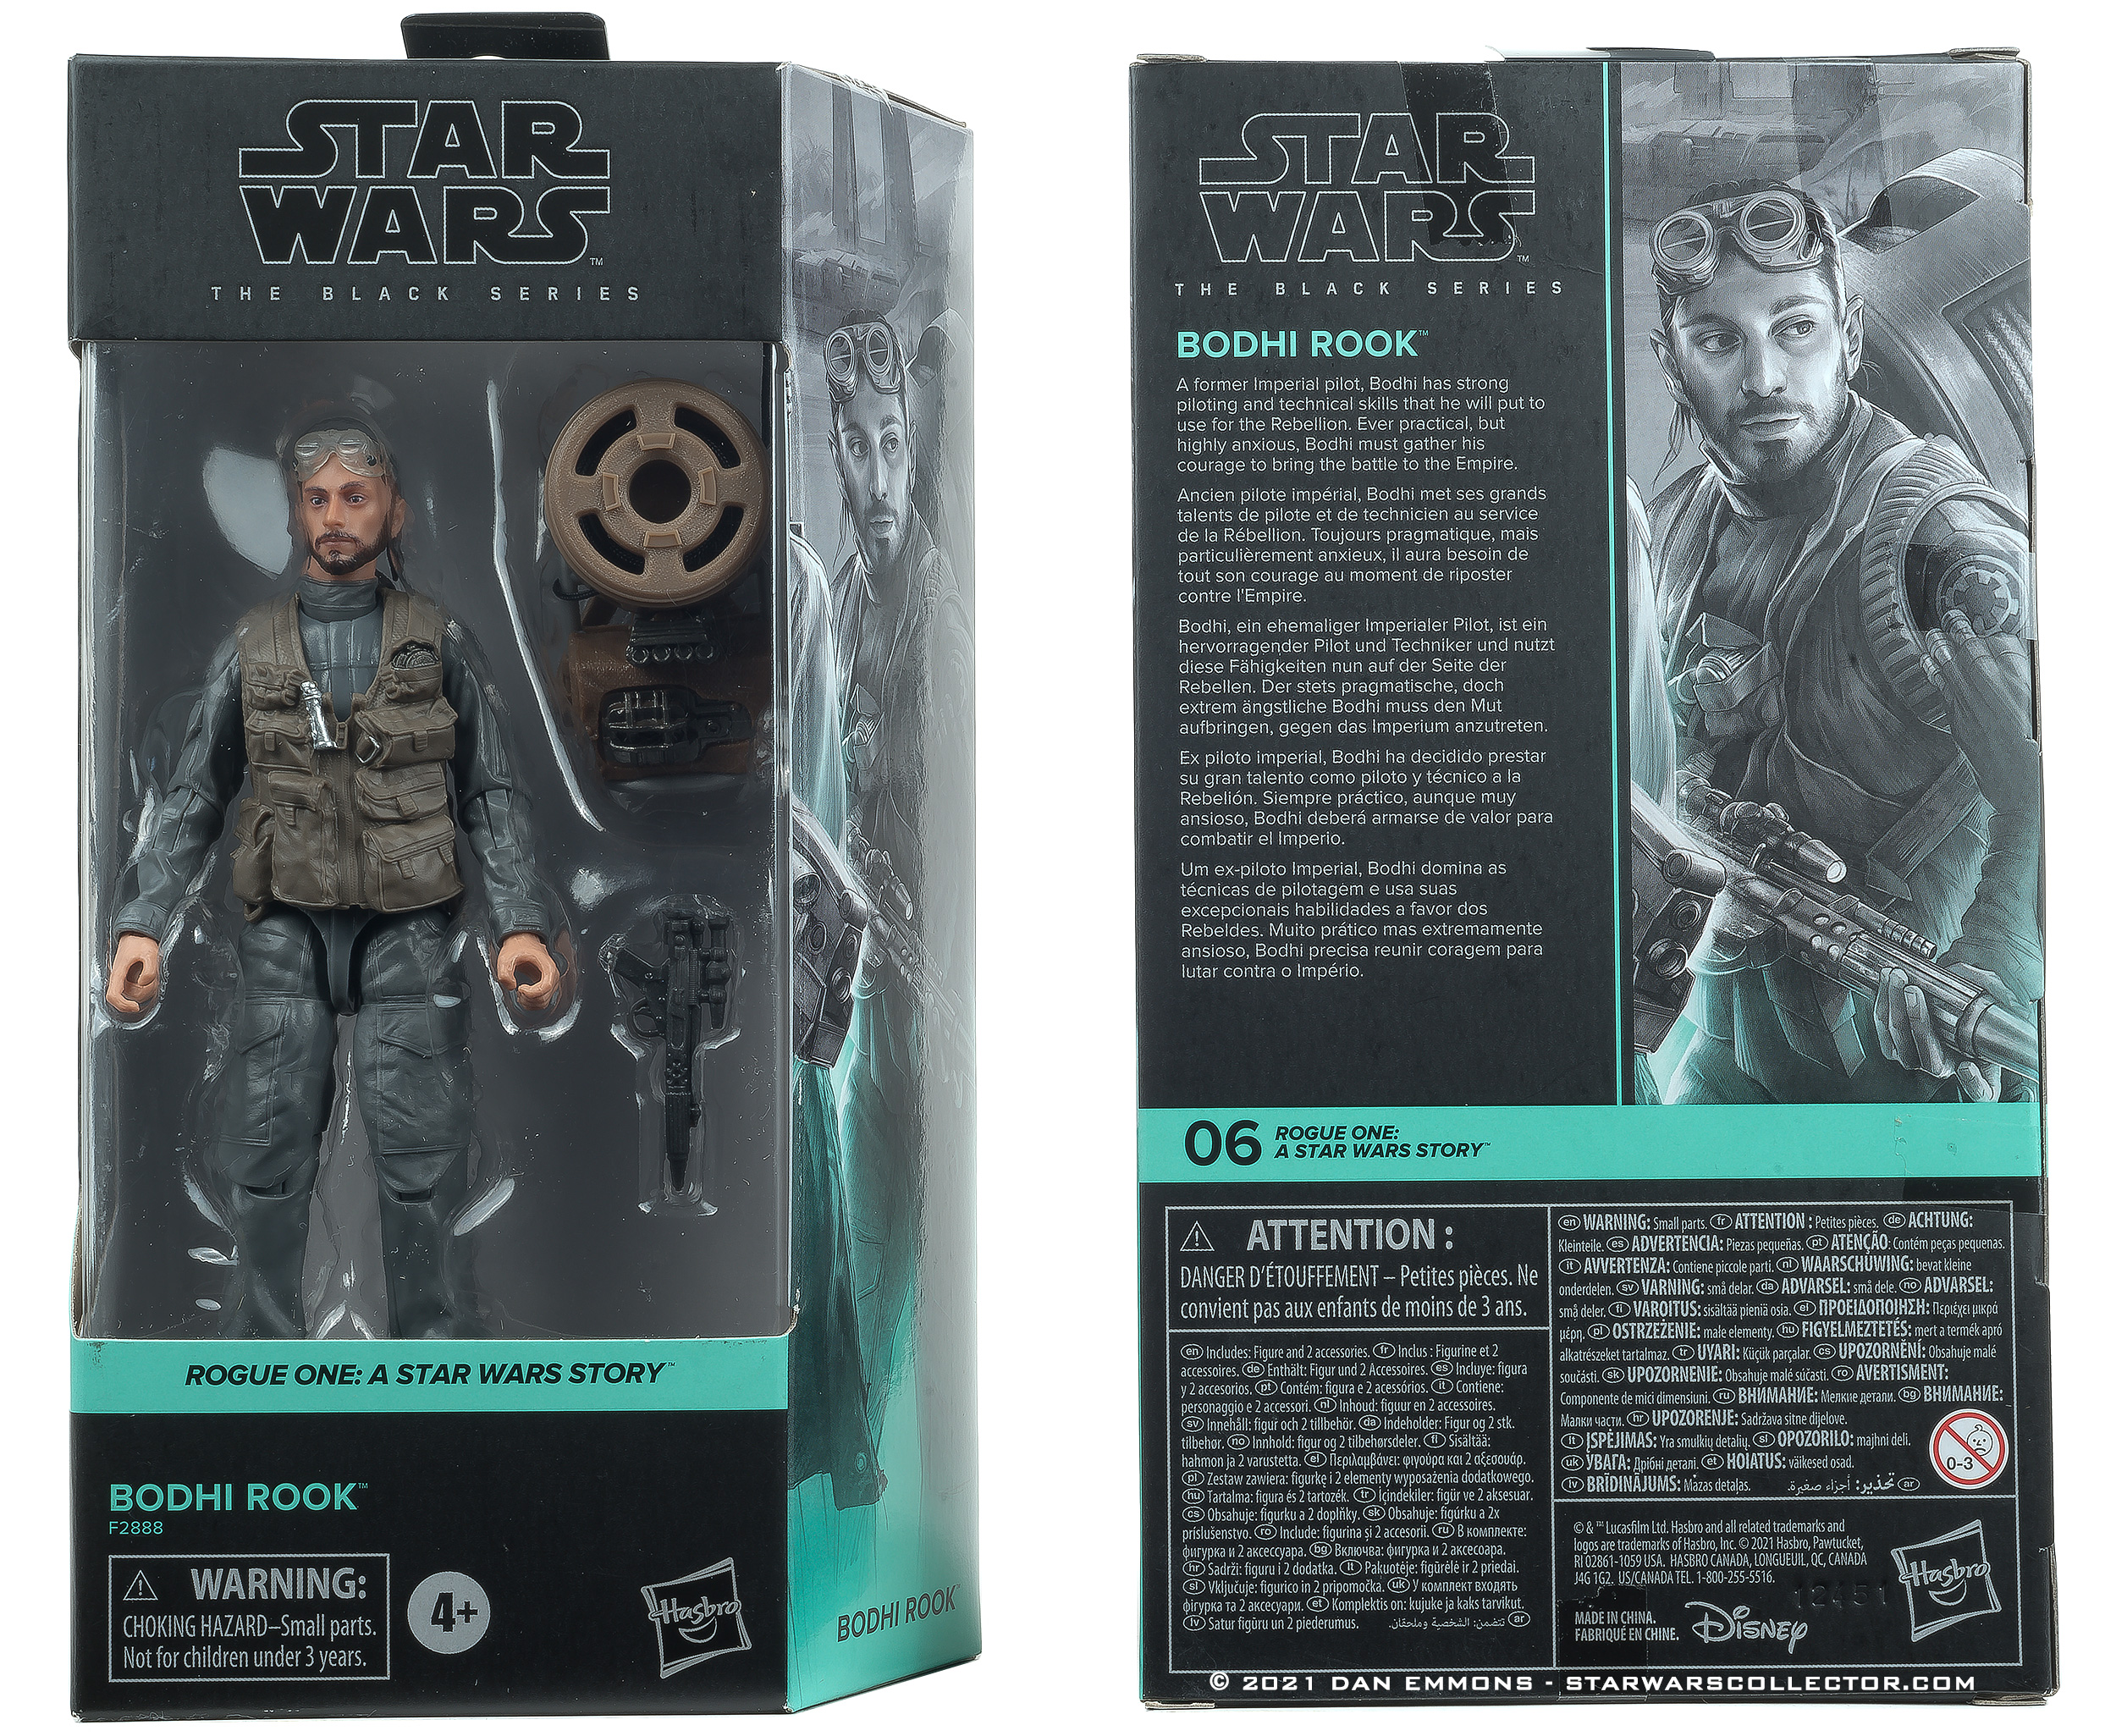 Mail Call 11/27 - The Black Series 6-Inch Rogue One 06: Bodhi Rook